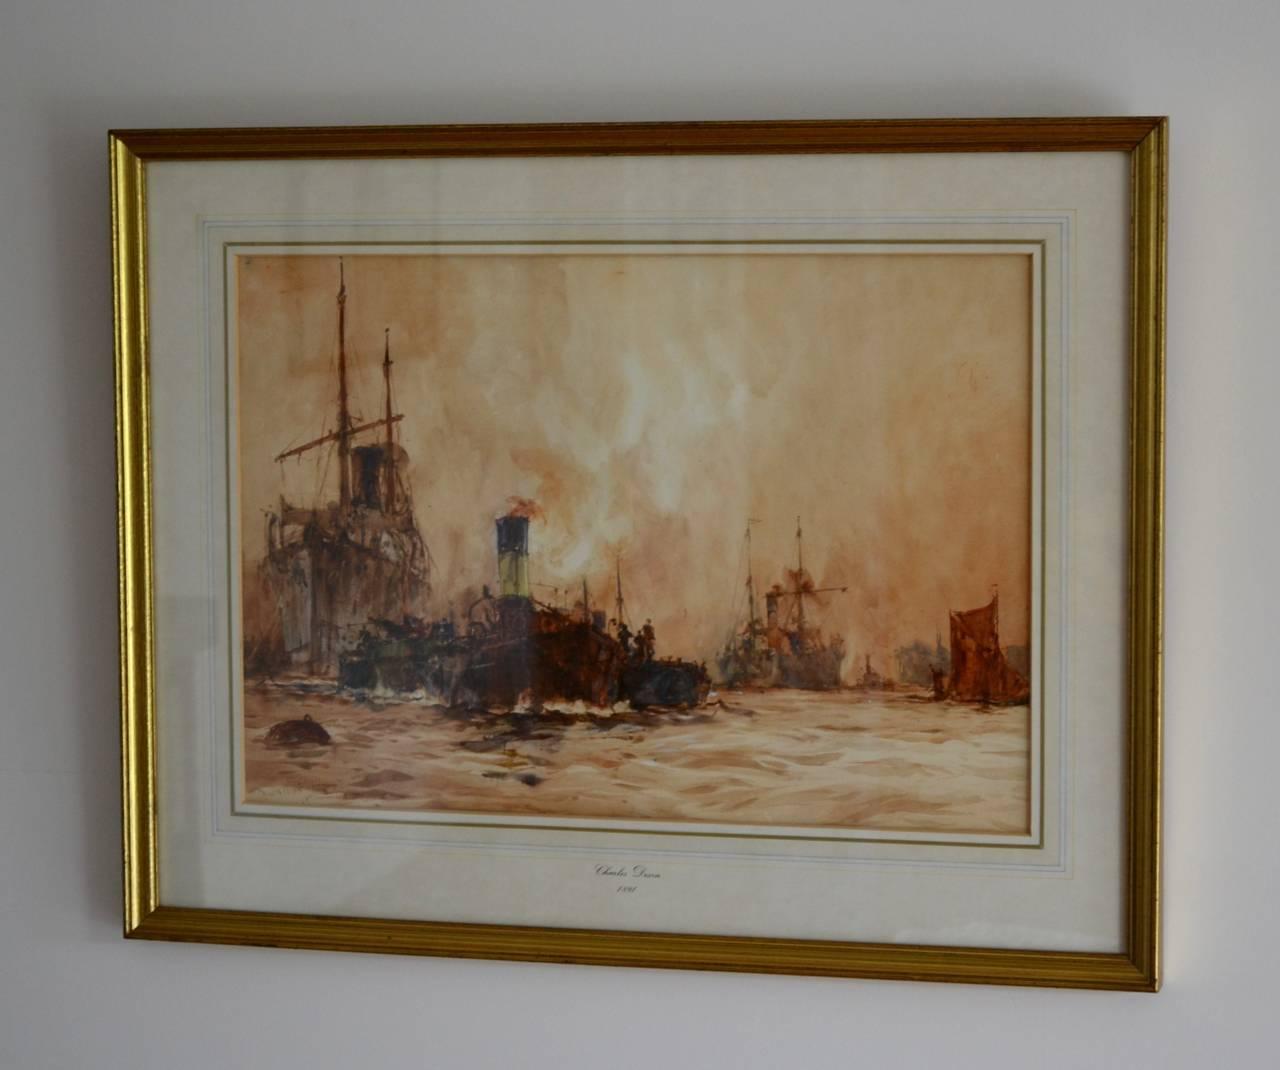 Shipping On The River Thames, London by Charles Dixon. Watercolour - Art by Charles Edward Dixon